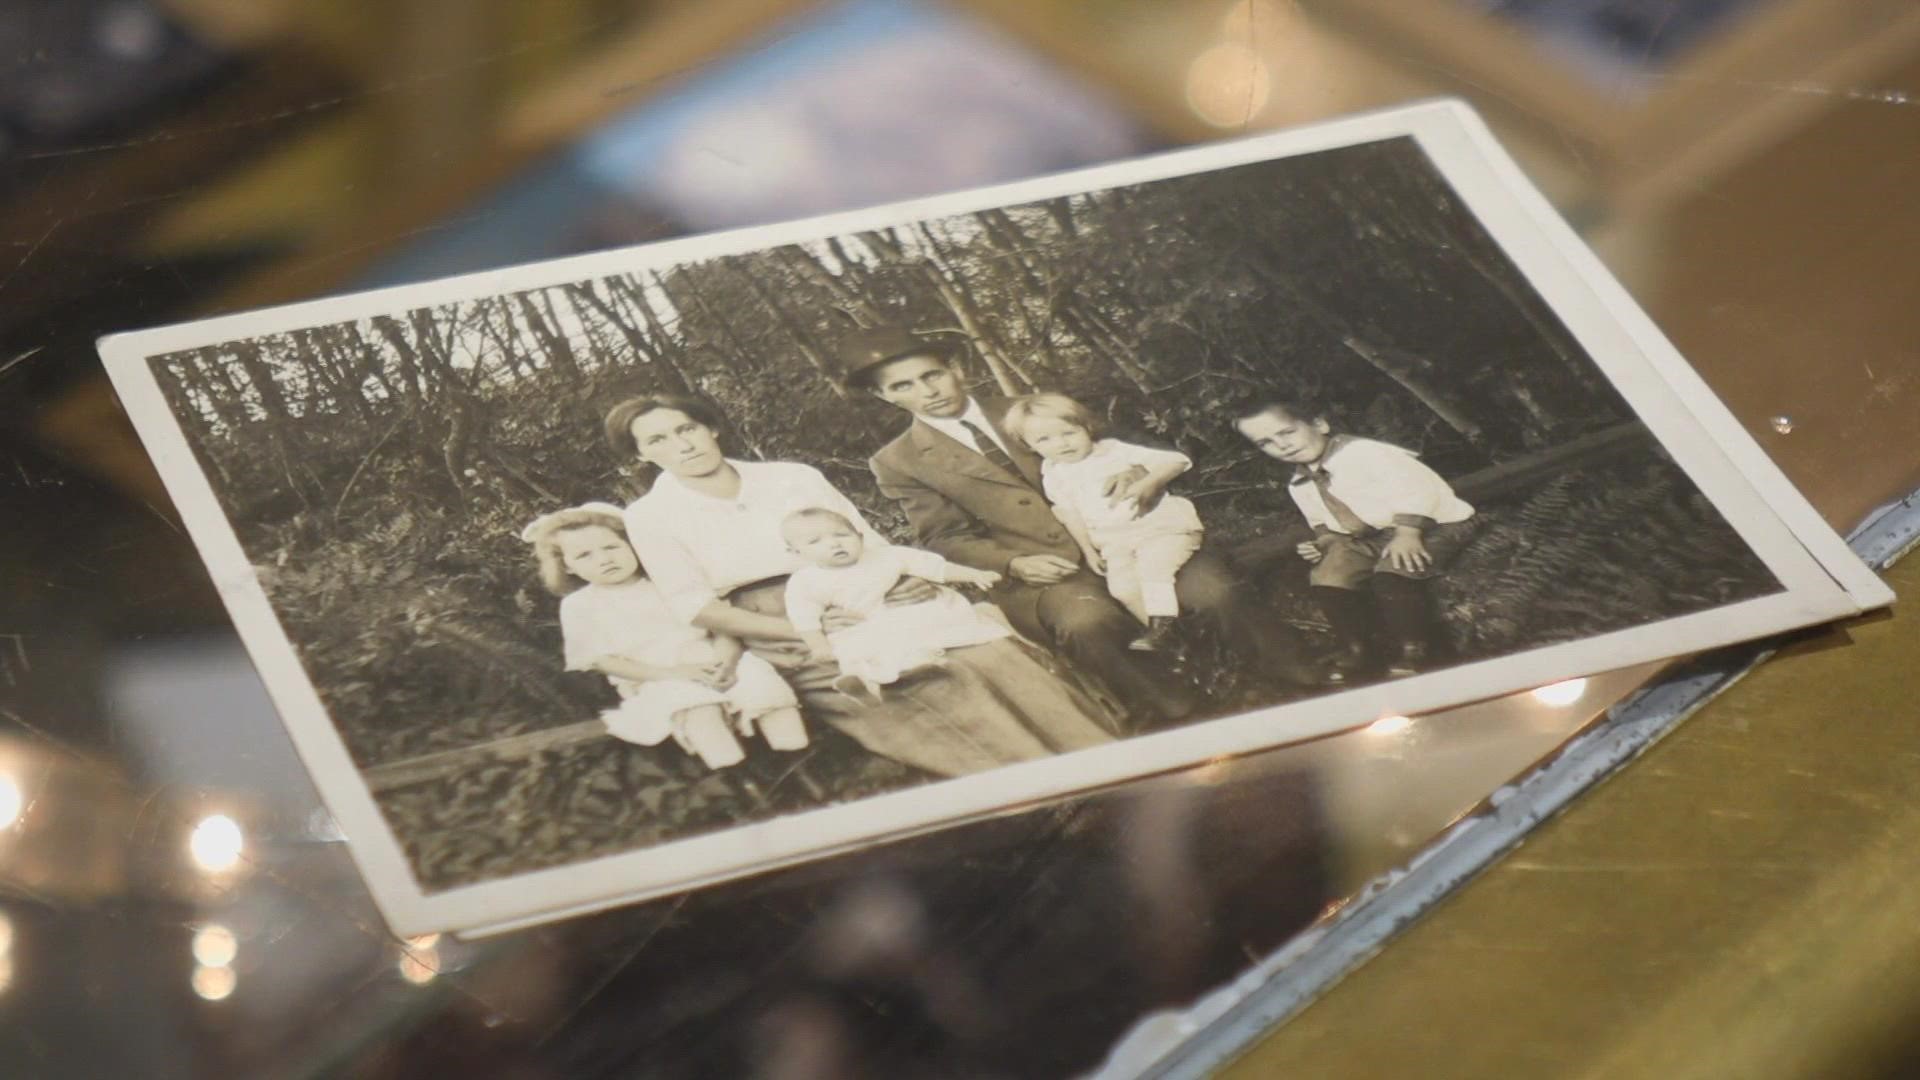 The Snoqualmie Valley Historical Museum is looking for help from the public to identify subjects in turn of the century Preston family photos.